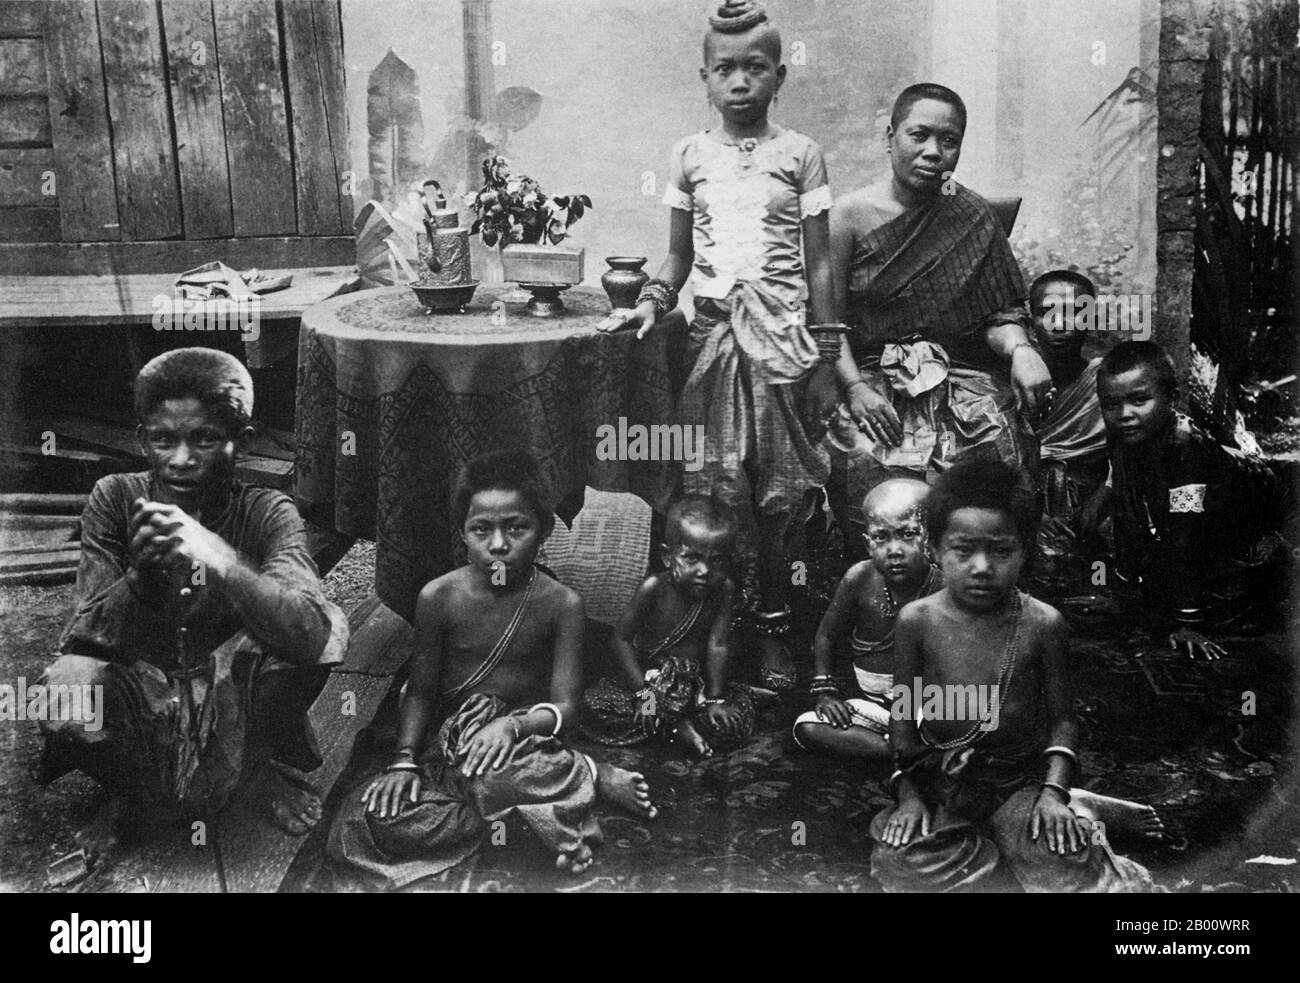 Cambodia: A Cambodian family, photographed at their home in Prey Veng in 1928.  Under the French protectorate, the colonial authorities saw potential of the Prey Veng region in terms of agriculture and fishing and its proximity to the French colony of Cochinchina. Mass deforestation took place to create land for agriculture. Nevertheless, when the Khmer Rouge took power in 1975, the province experienced its first famine. As the Vietnamese army advanced to Phnom Penh in January 1979, the region became one of the first areas of Cambodia liberated from the Khmer Rouge. Stock Photo